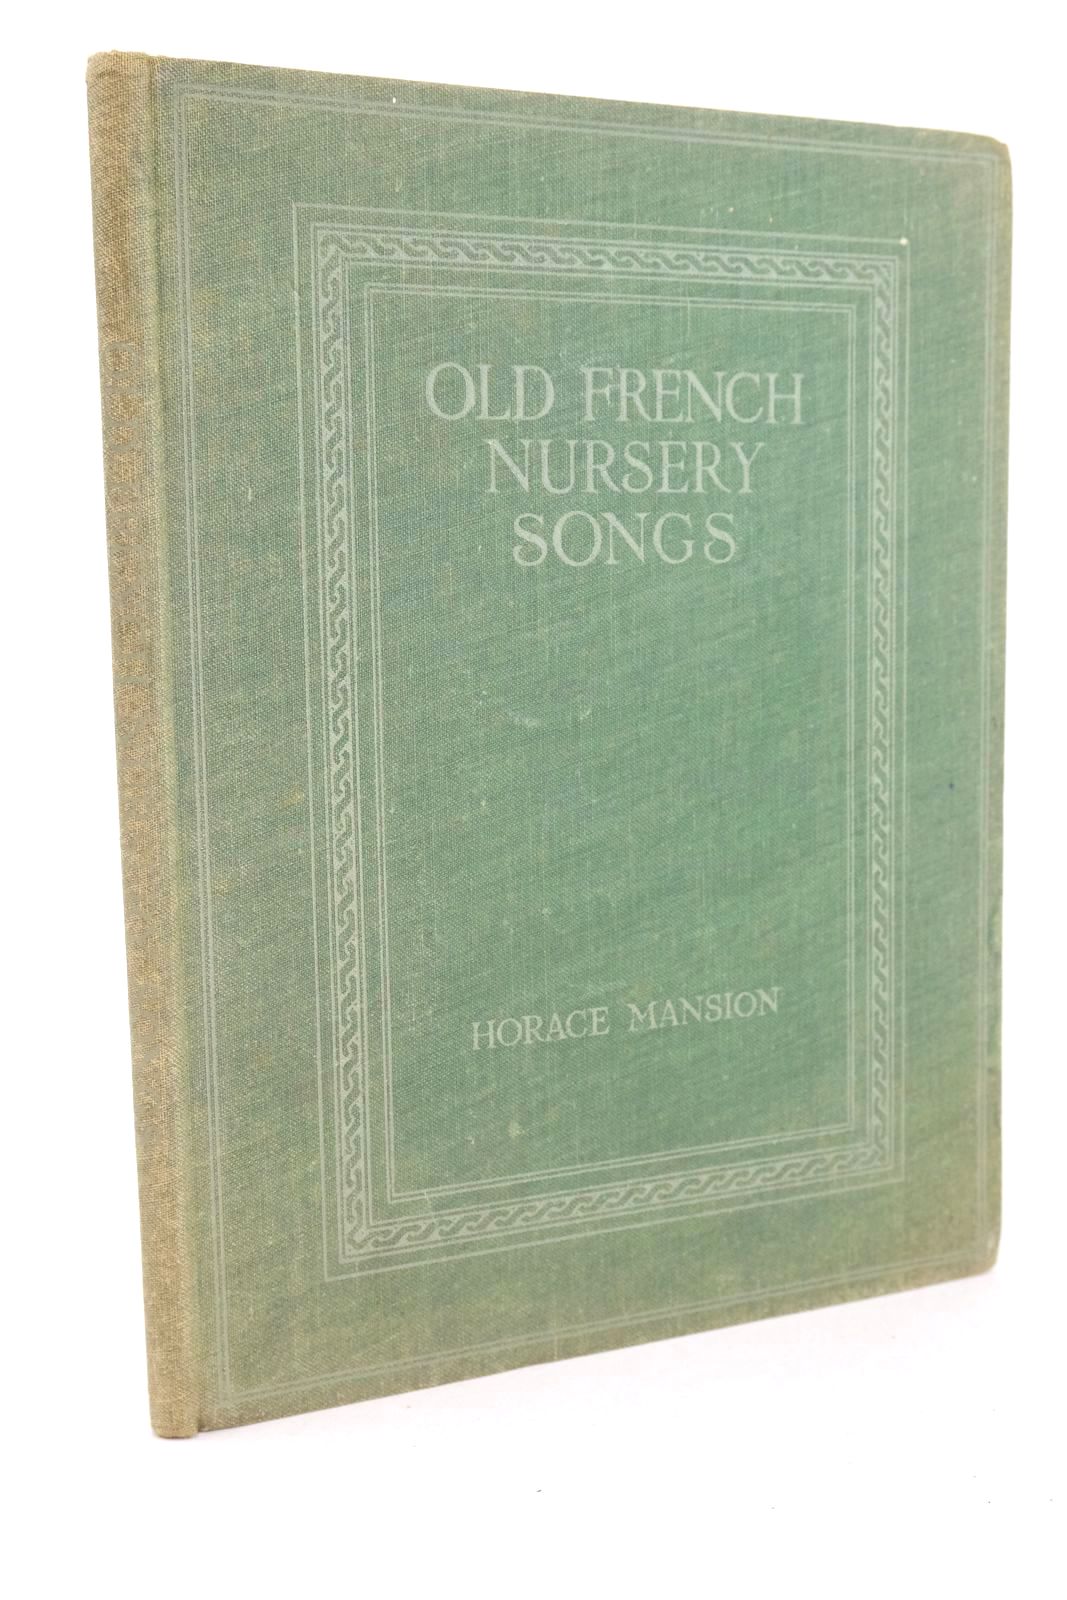 Photo of OLD FRENCH NURSERY SONGS written by Mansion, Horace illustrated by Anderson, Anne published by George G. Harrap &amp; Co. Ltd. (STOCK CODE: 1325640)  for sale by Stella & Rose's Books